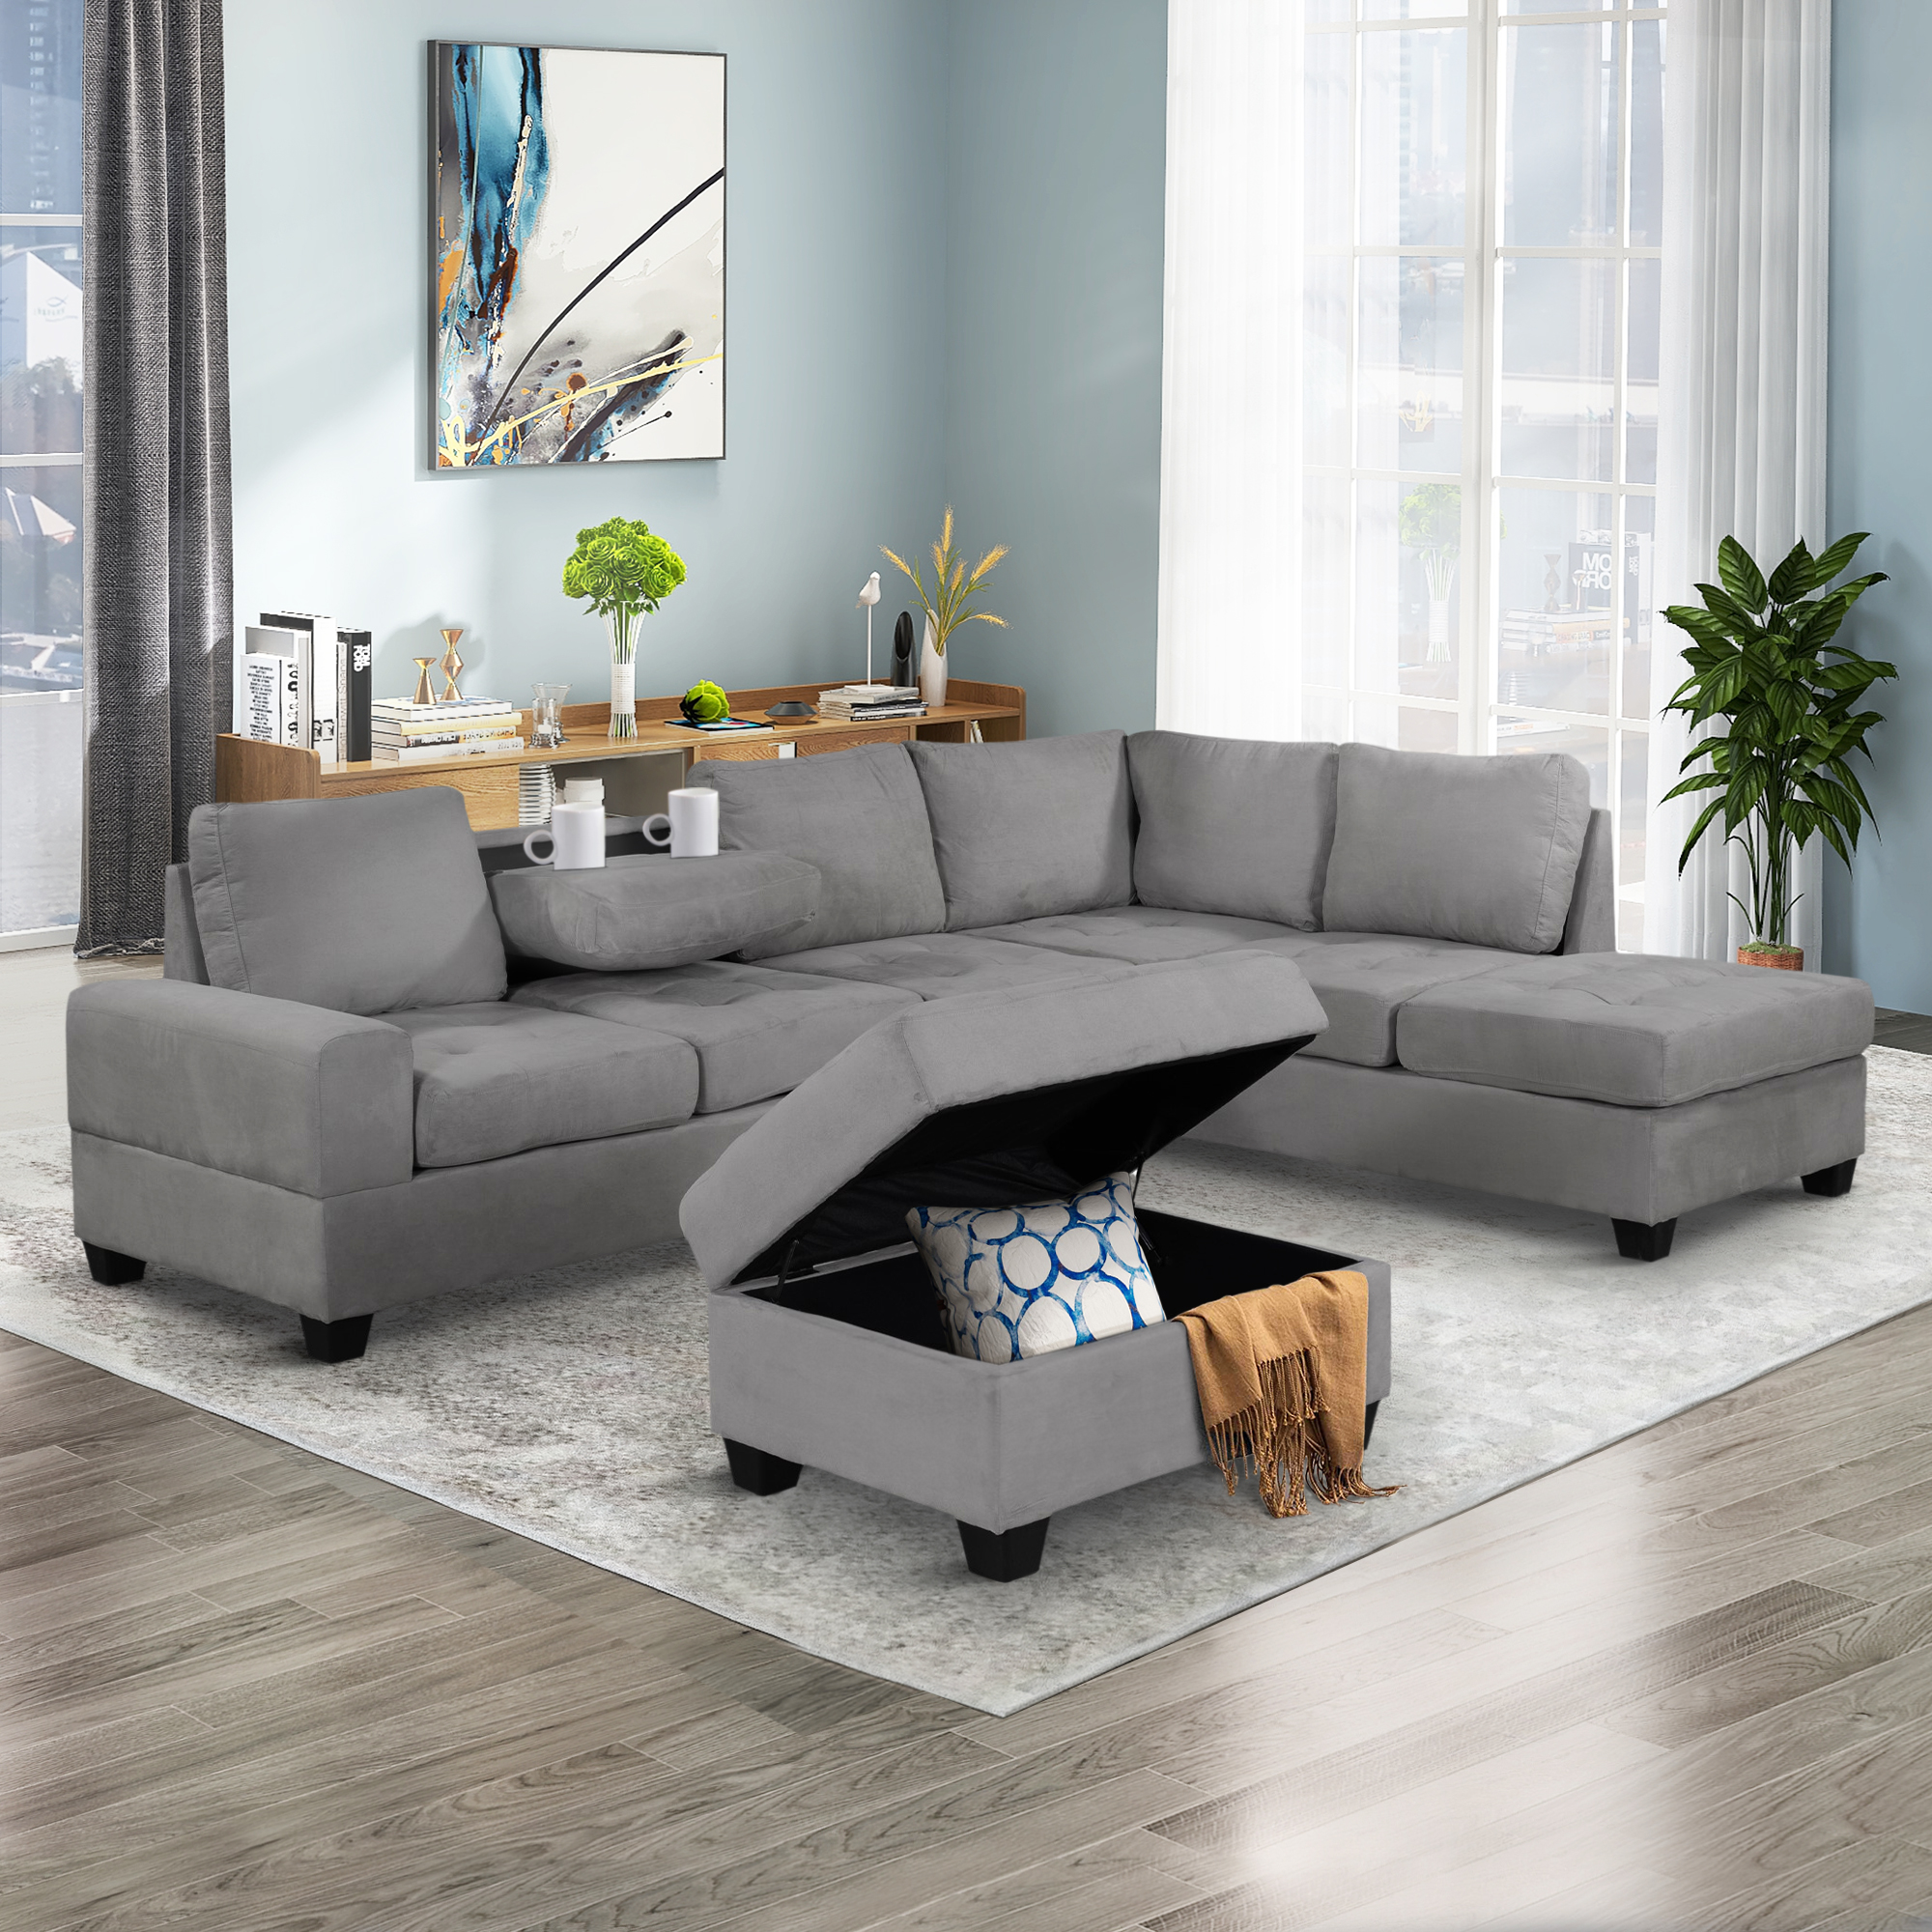 L-Shaped Couch Set With Storage Ottoman And Two Cup Holders - SG000410AAA